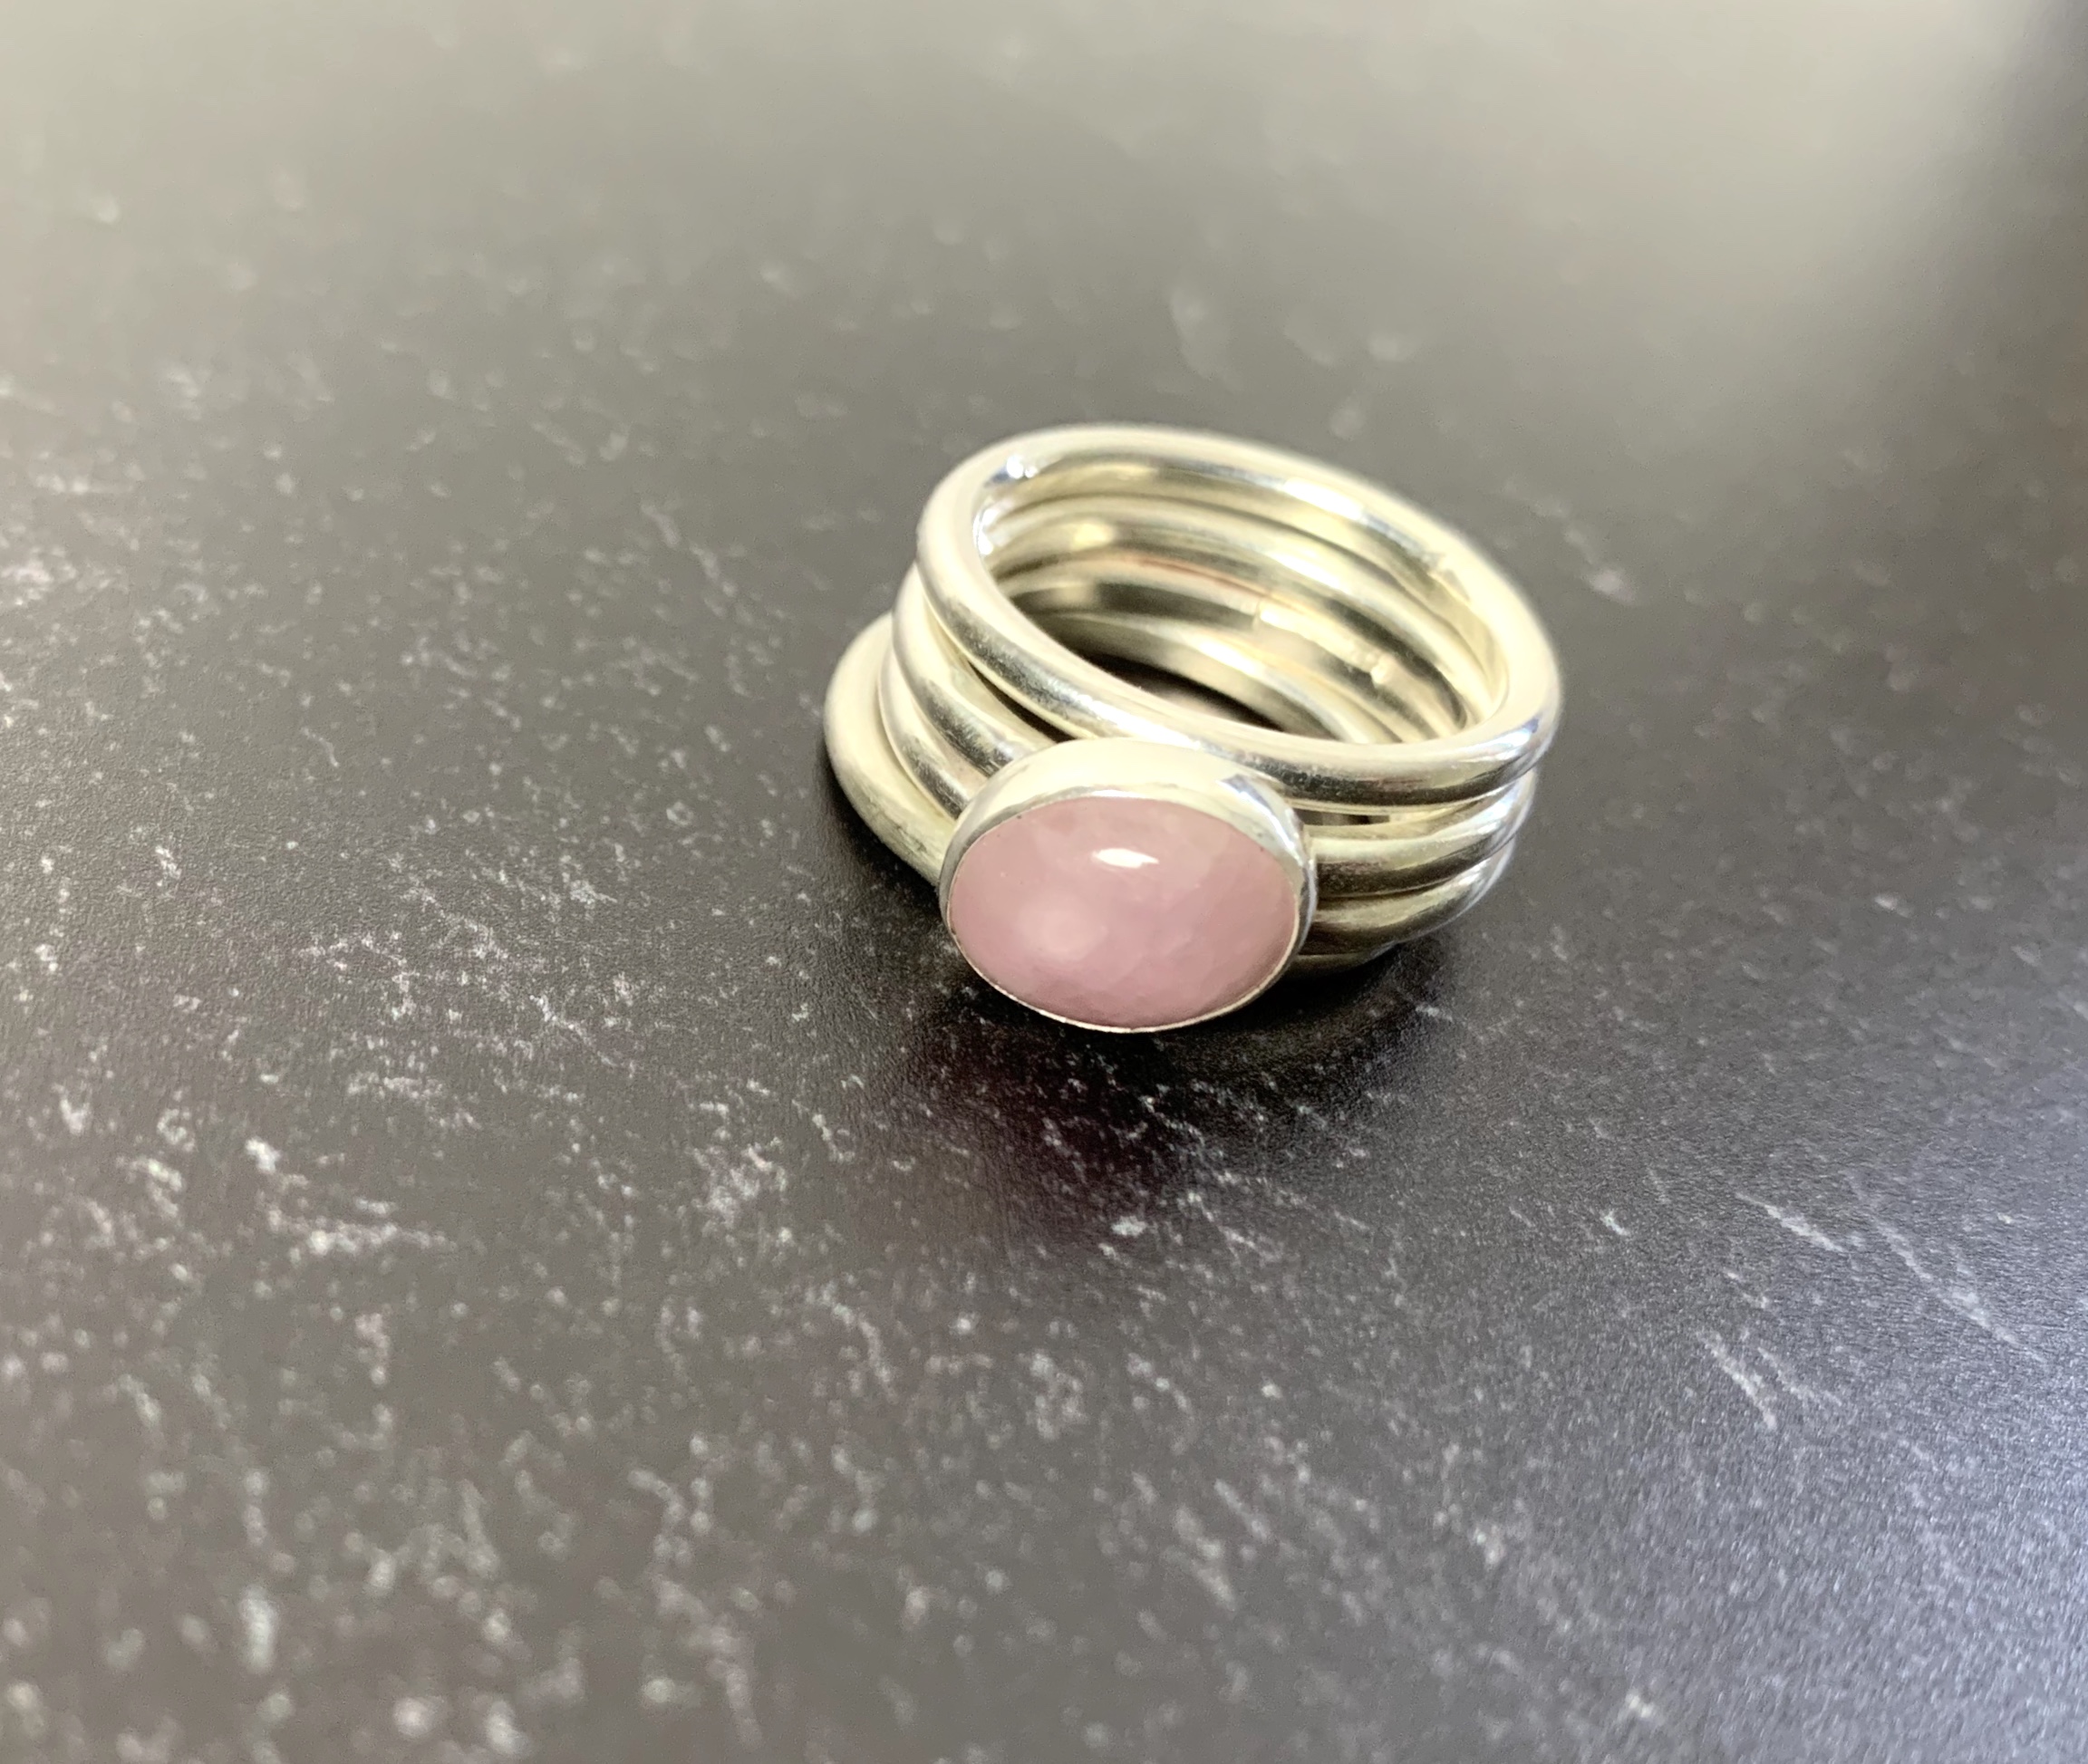 This Rose - Rose Quartz Stacking Rings (size 6) is made with love by Juli Prizant Designs! Shop more unique gift ideas today with Spots Initiatives, the best way to support creators.